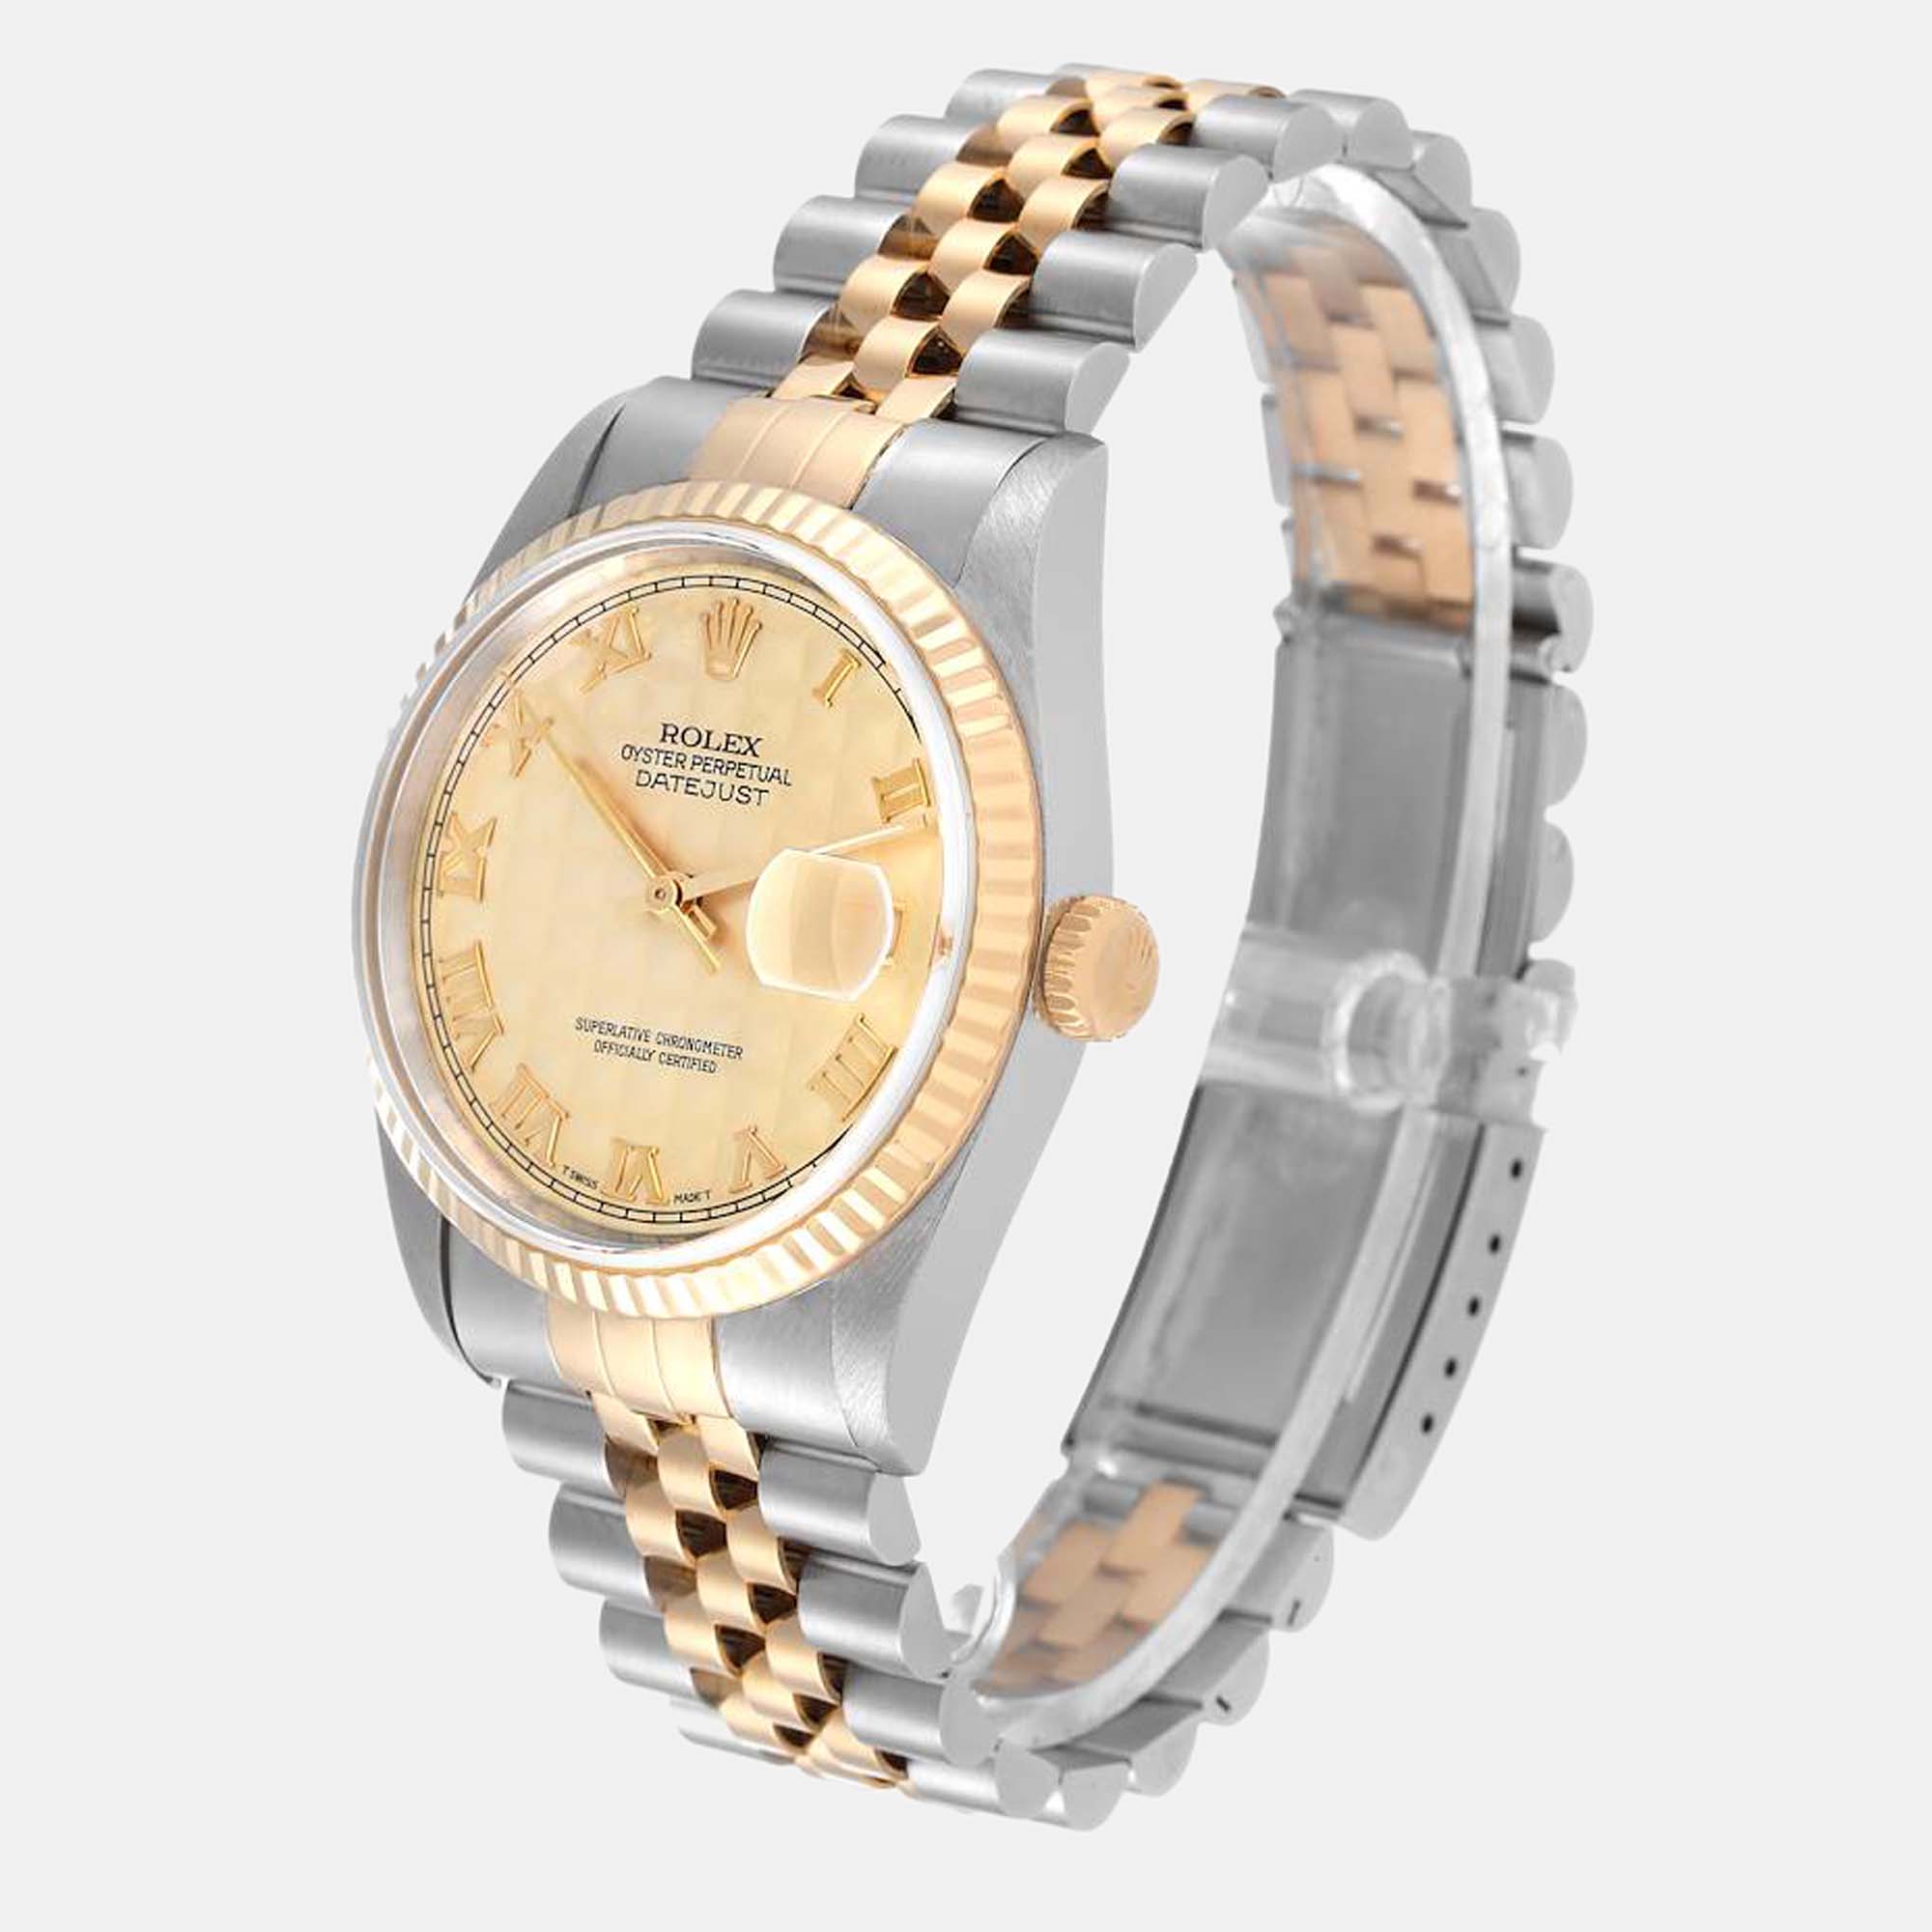 Rolex Champagne 18k Yellow Gold And Stainless Steel Datejust 16233 Automatic Men's Wristwatch 36 Mm